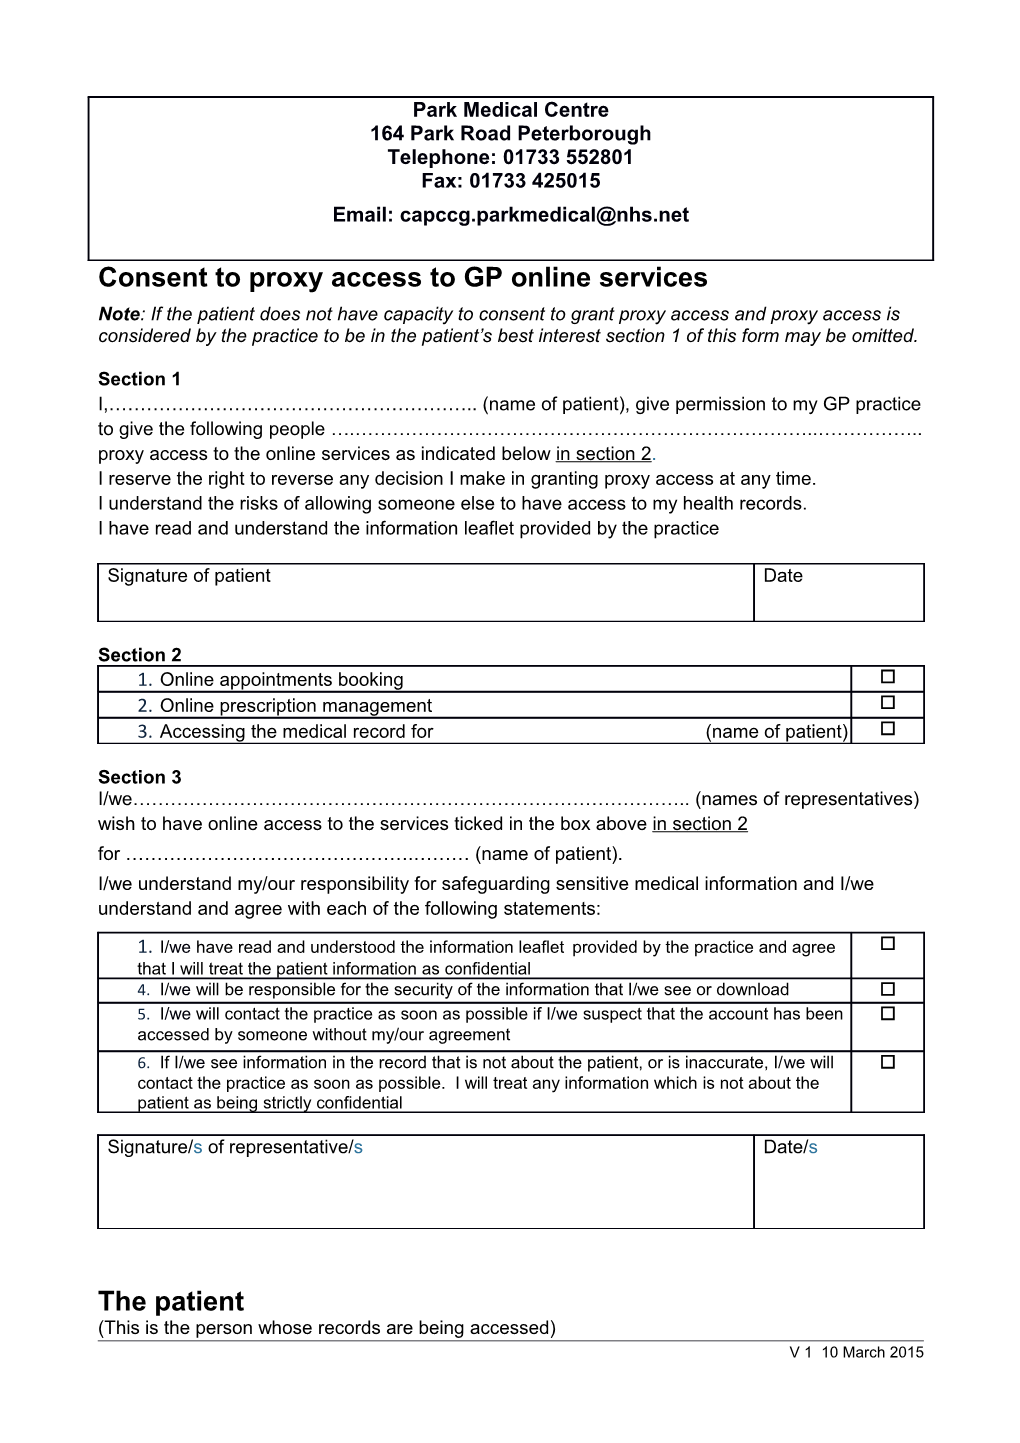 Consent to Proxy Access to GP Online Services